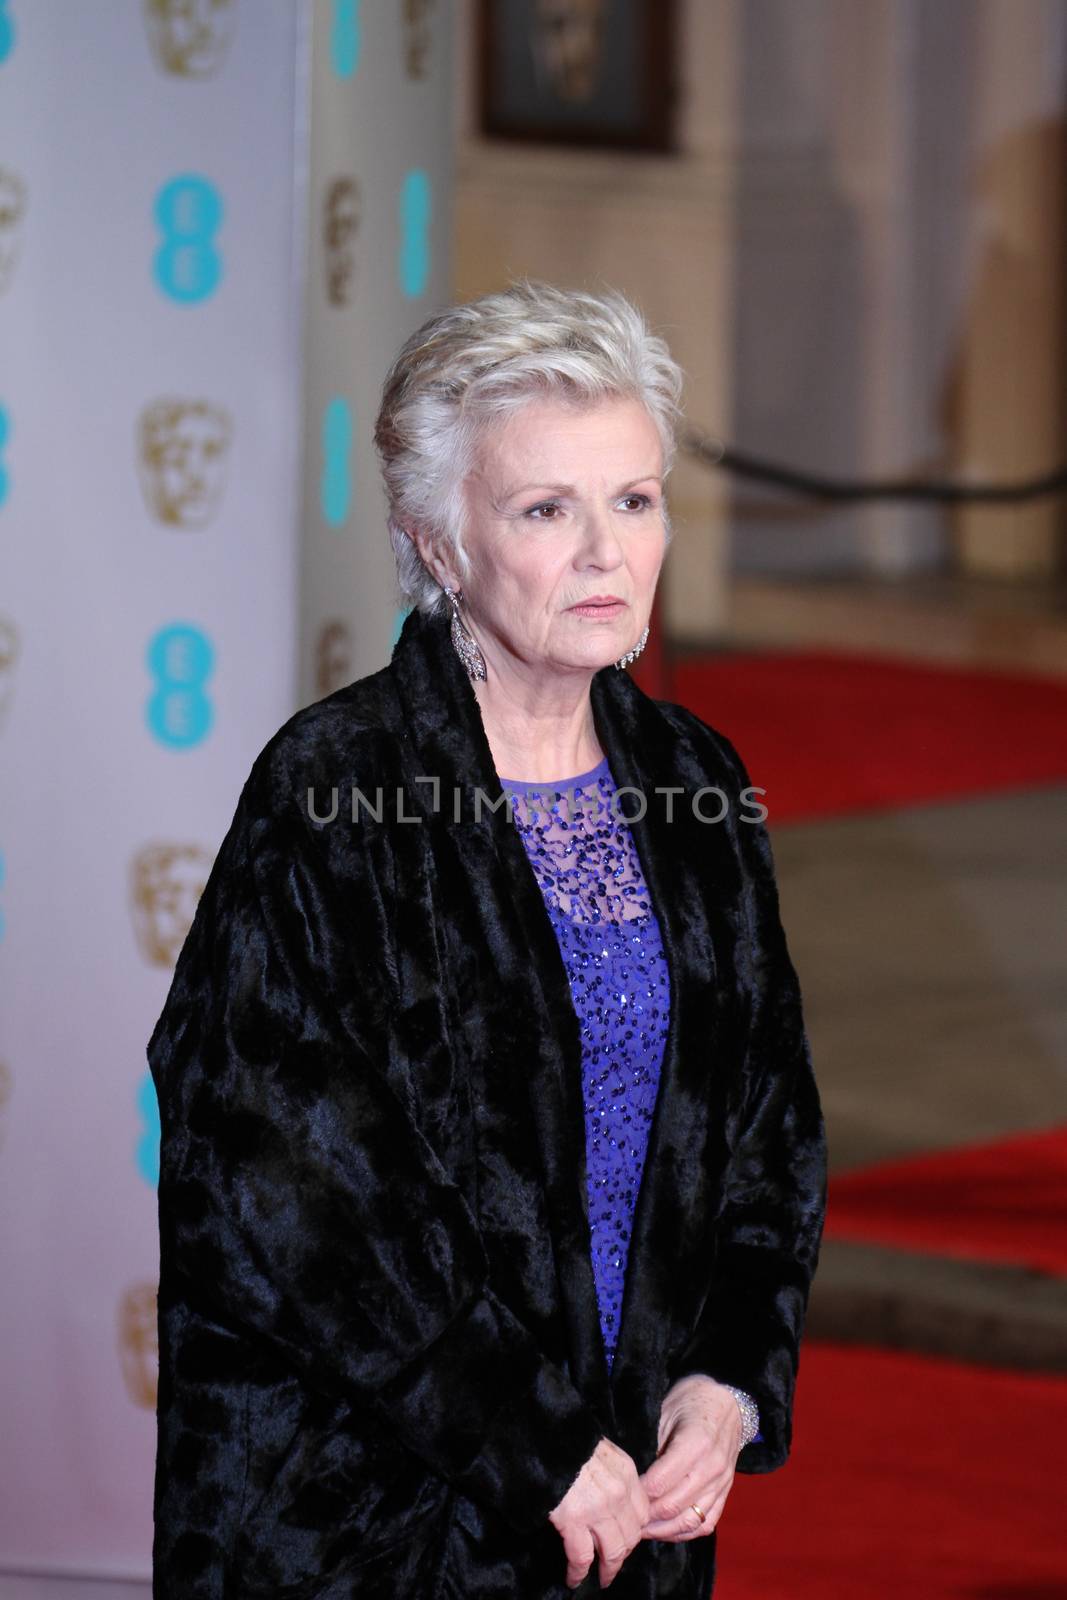 UK, London: British actress Julie Walters poses on the red Carpet at the EE British Academy Film Awards, BAFTA Awards, at the Royal Opera House in London, England, on 14 February 2016. 